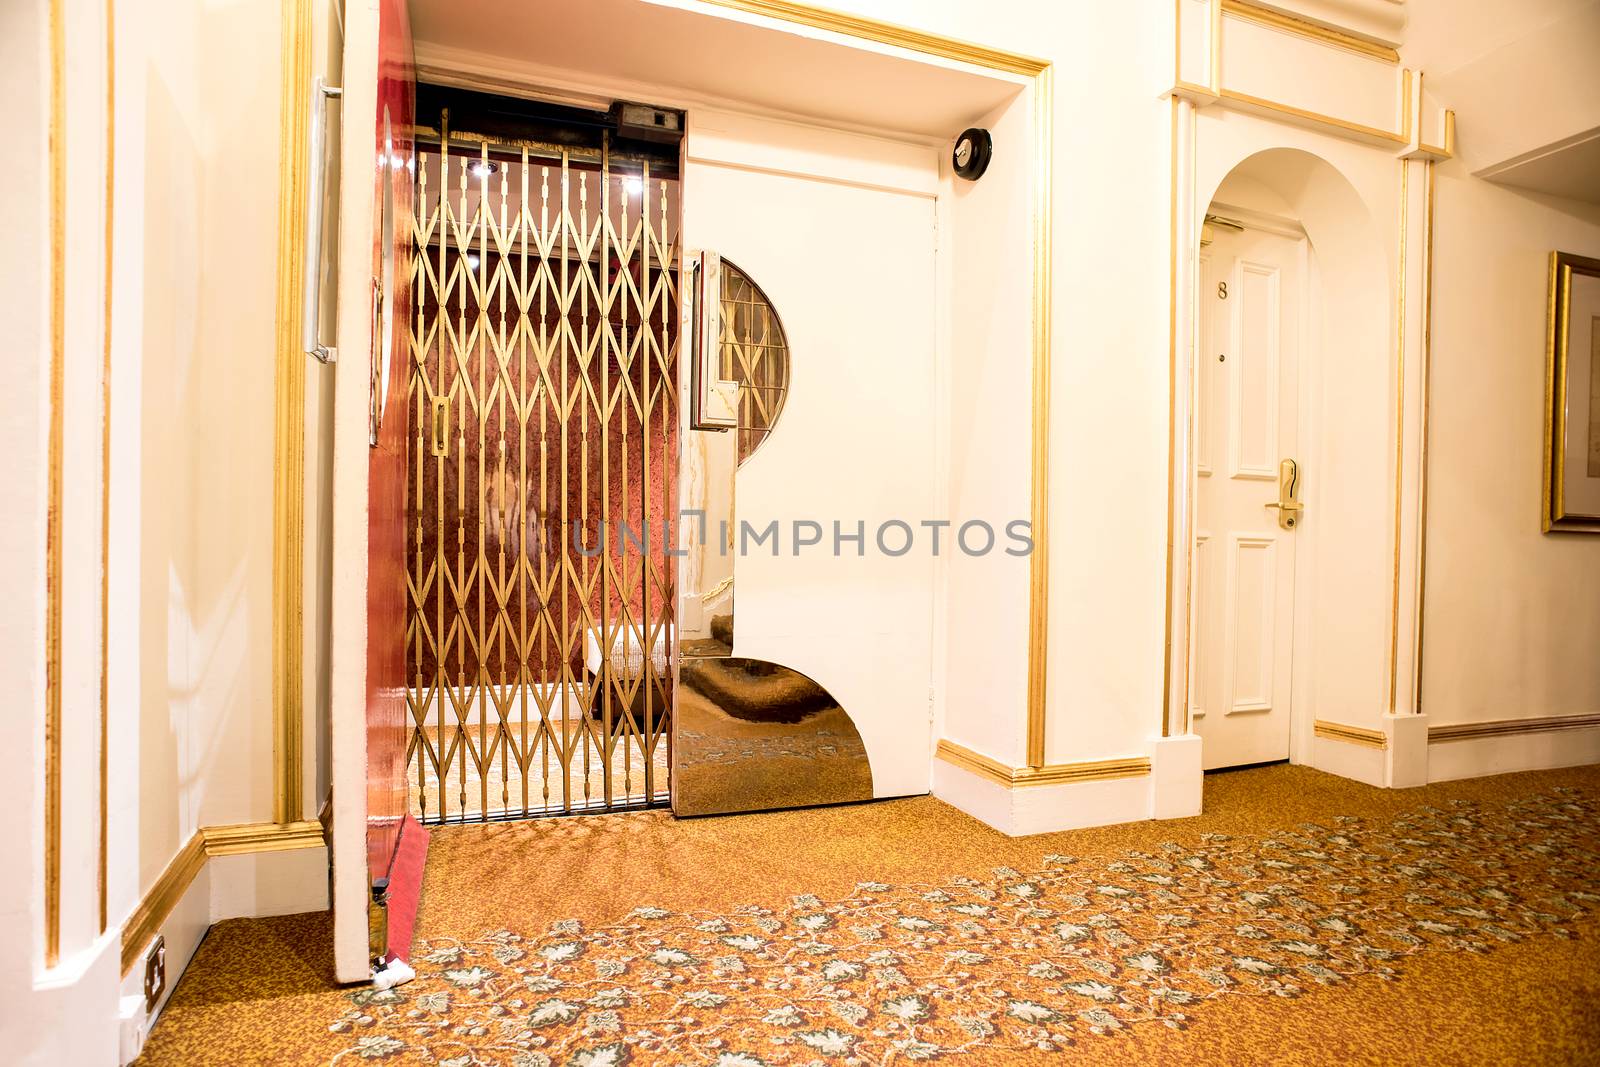 Old vintage lift at hotel lobby by stockyimages